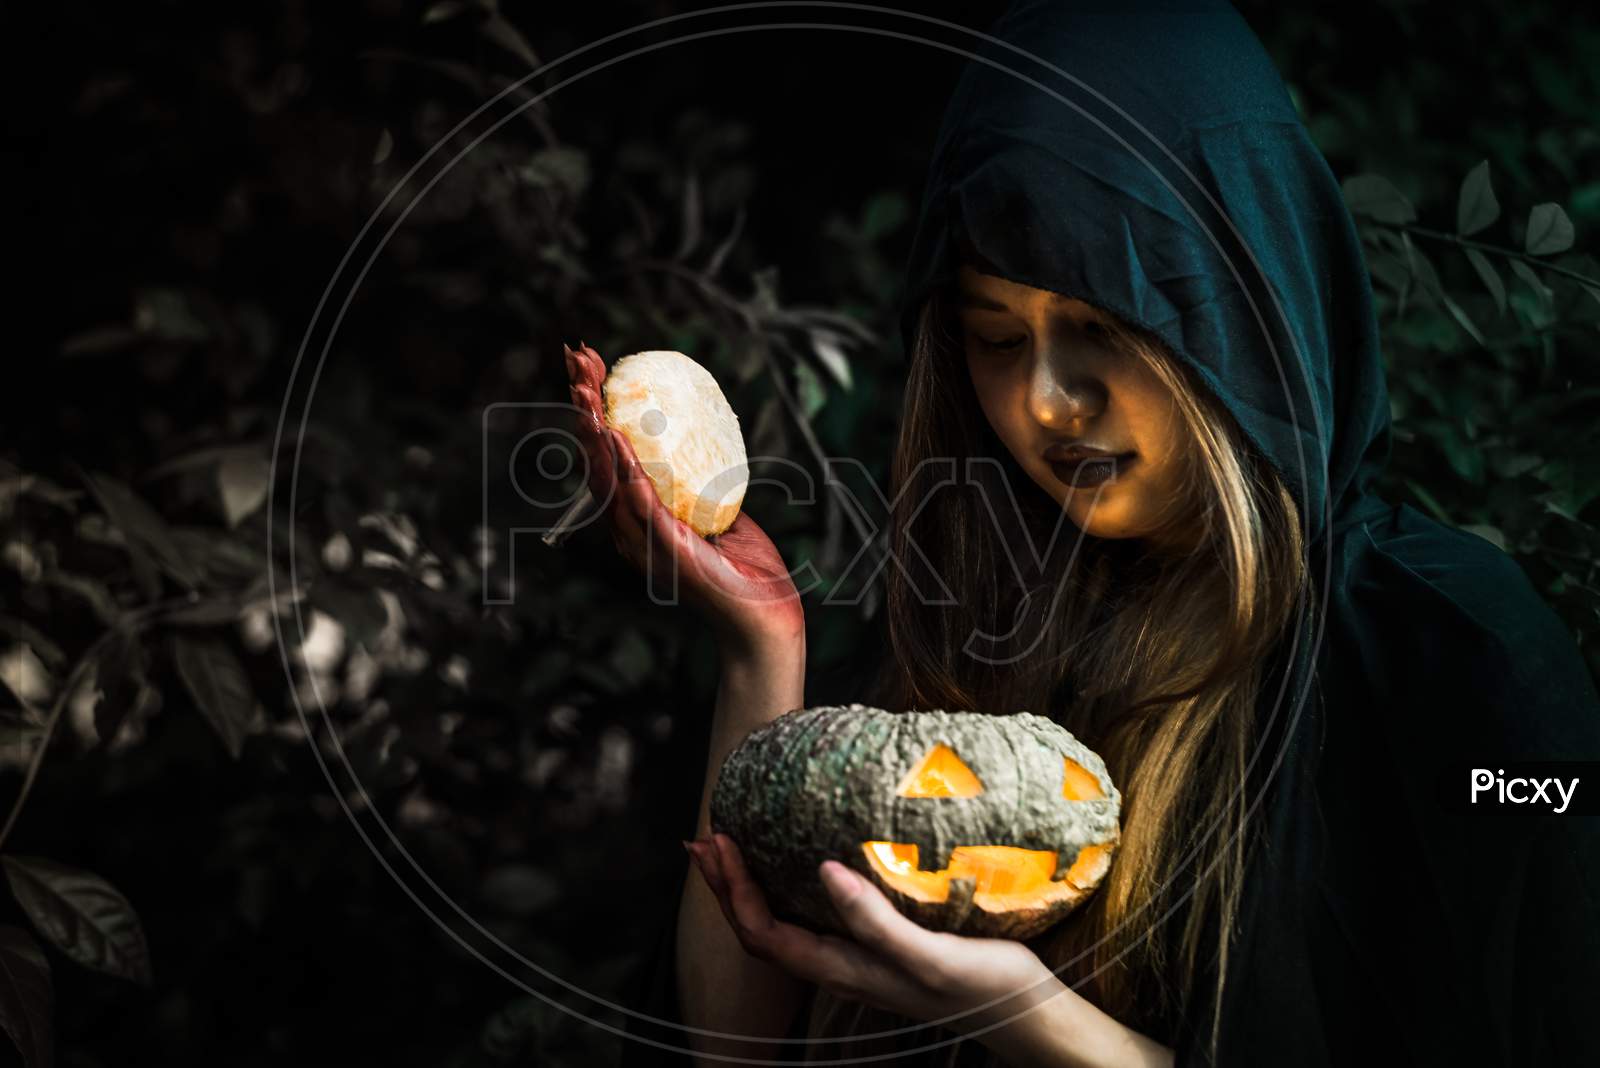 Witch Opening Pumpkin Lid By Hand. Old Woman Holding Bright Pumpkin In Dark Forest. Halloween Day And Mystery Concept. Fantasy Of Magic Theme. Demon Angle Theme.